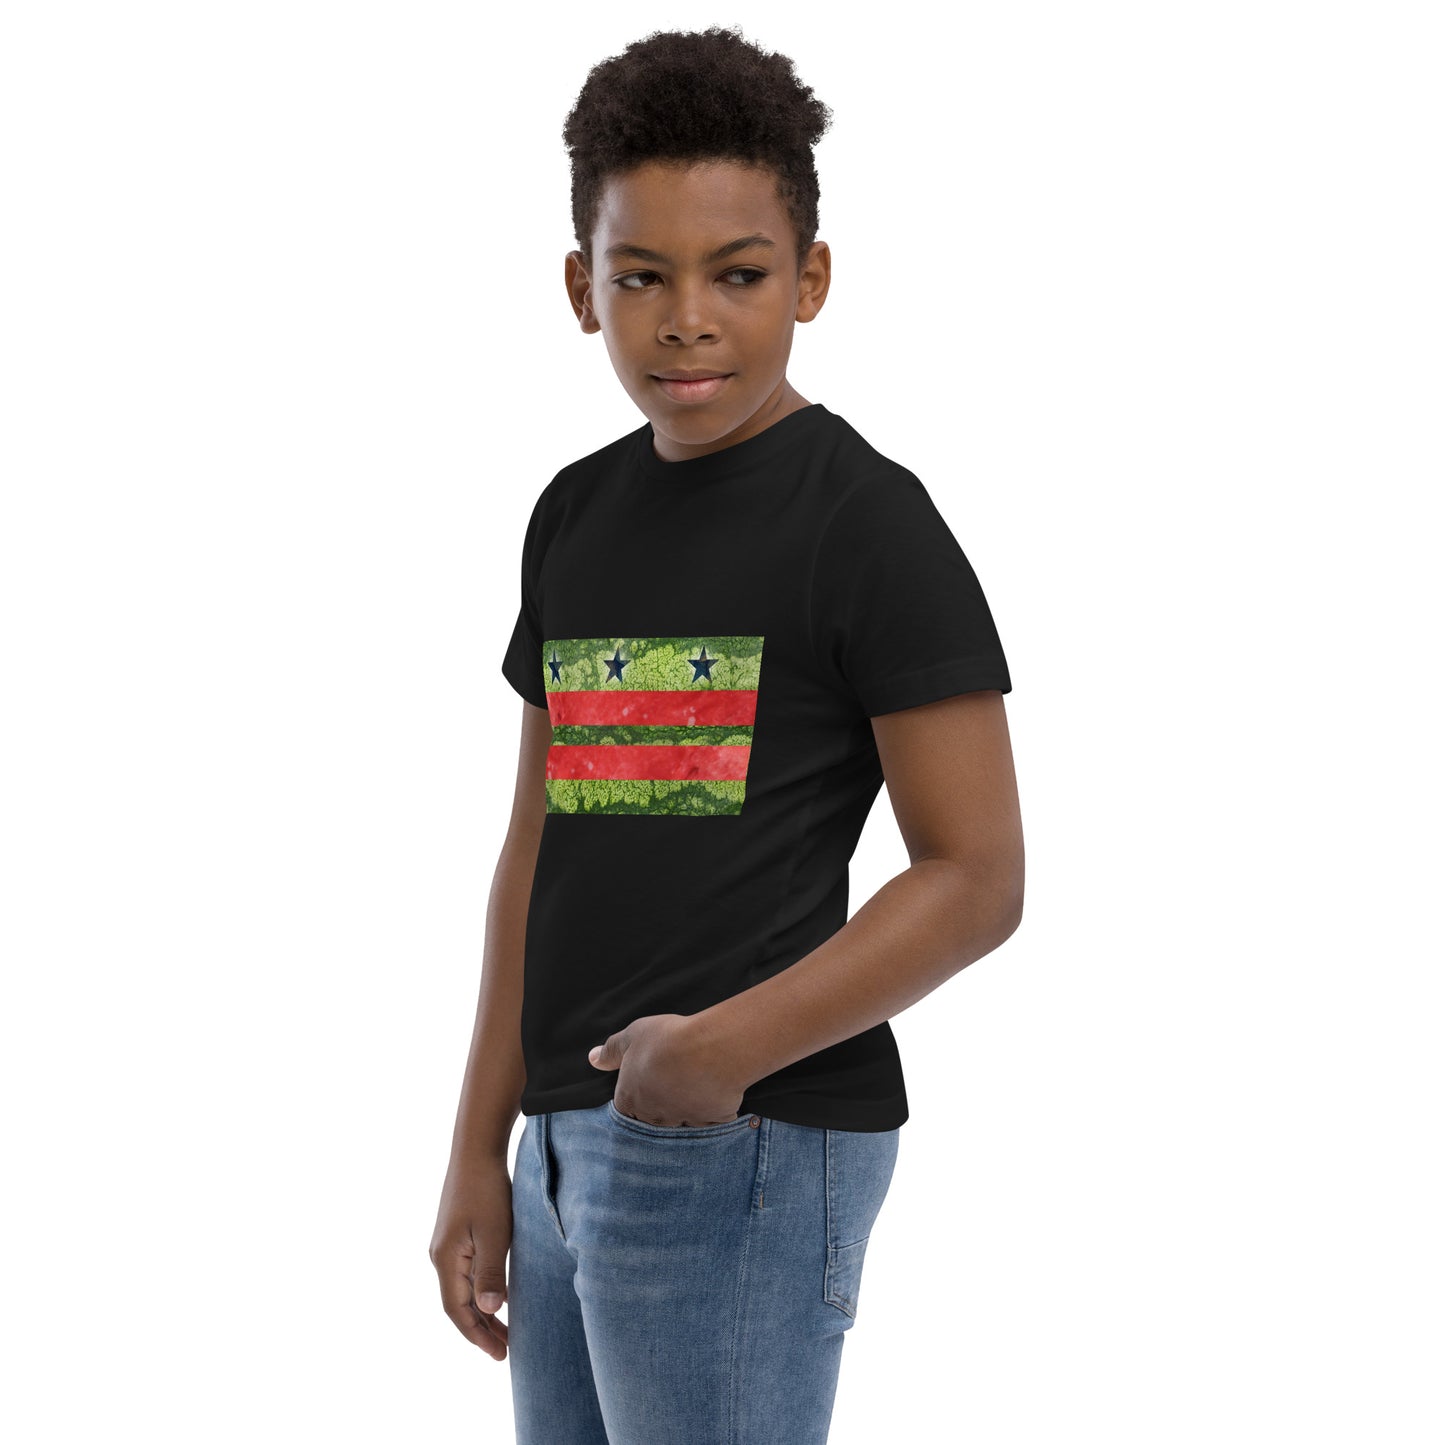 Watermelon DC Flag Youth jersey t-shirt